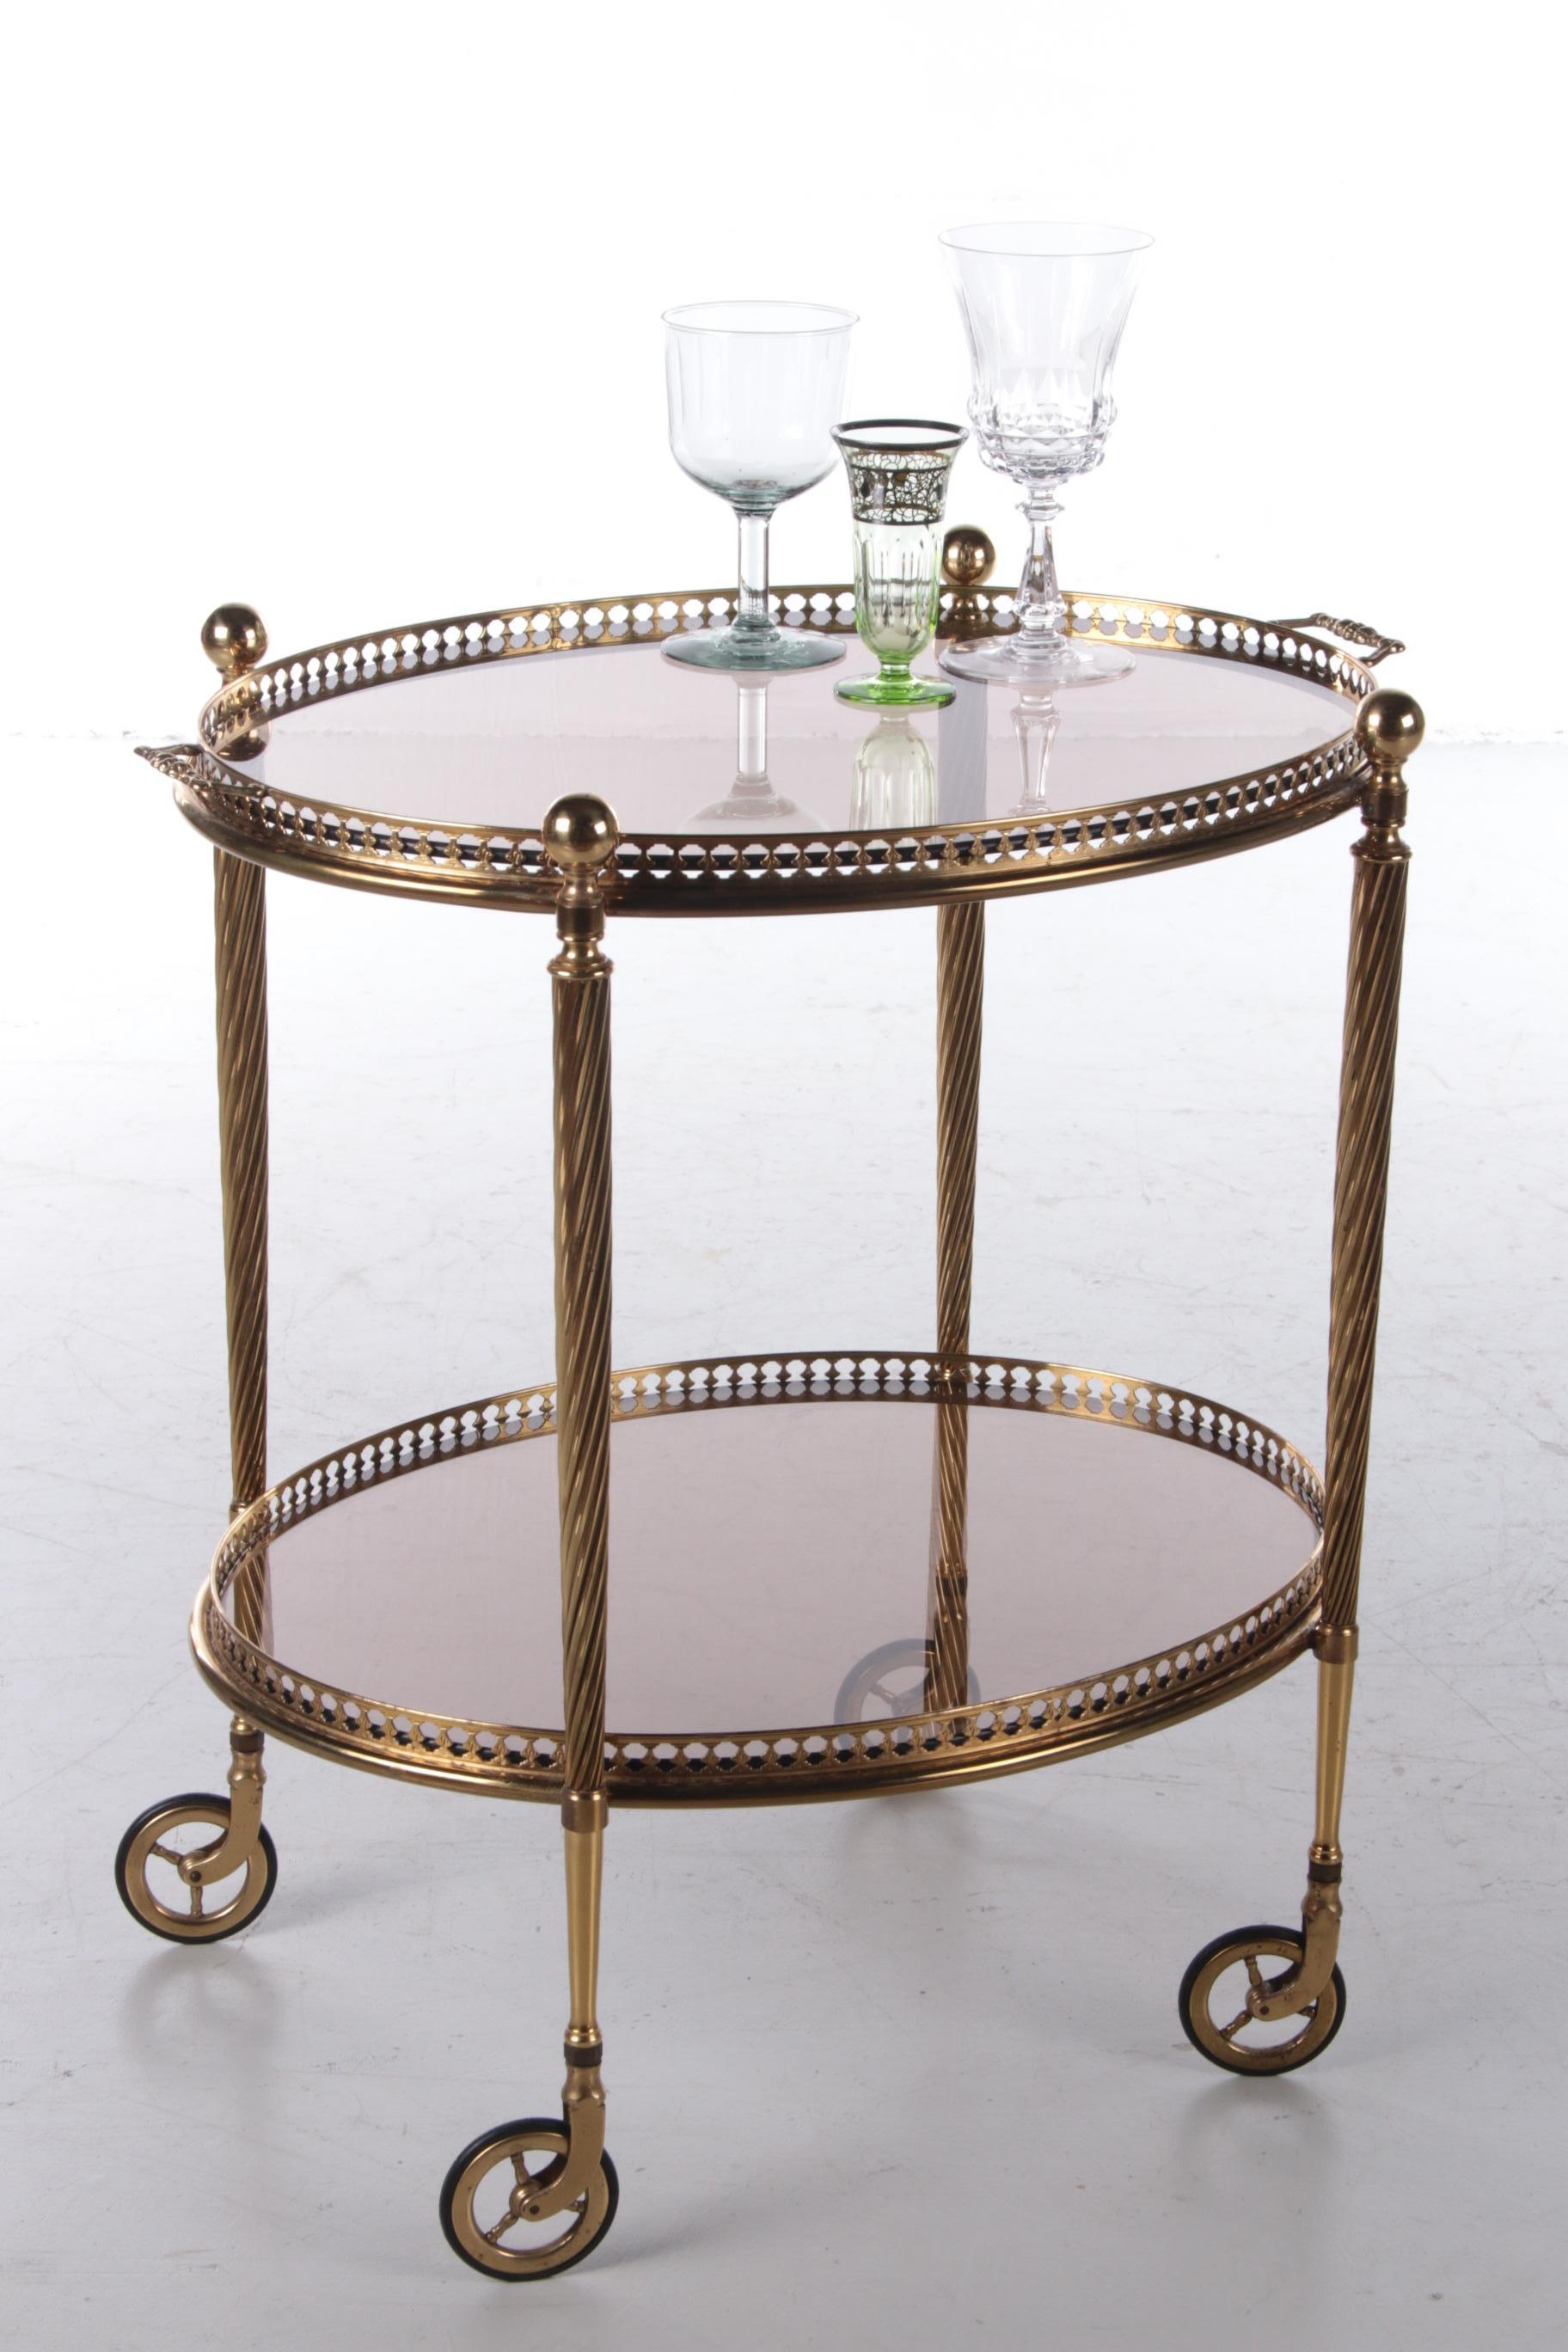 Maison Jansen Hollywood Regency trolley, 1950s


A beautiful Maison Jansen brass vintage trolley with two layers. Nicely round in shape with a brass frame and glass plates. The top tray is removable and can also be used as a tray.

Maison